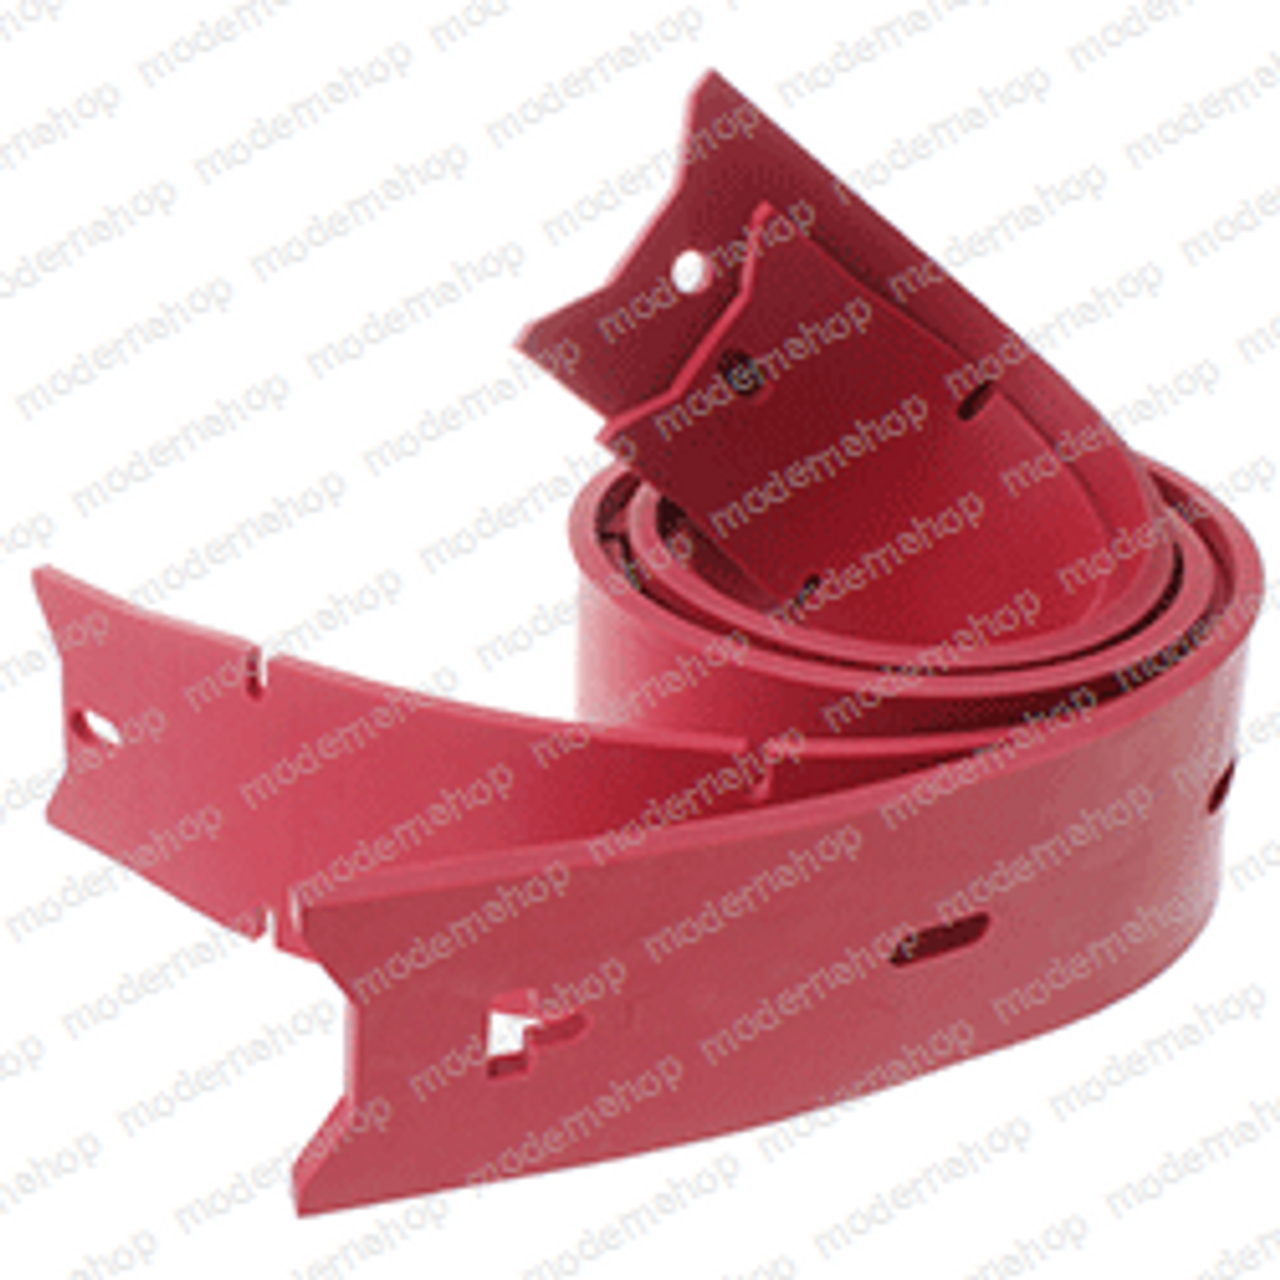 56382739: Clarke Sweepers SQUEEGEE KIT - RED GUM